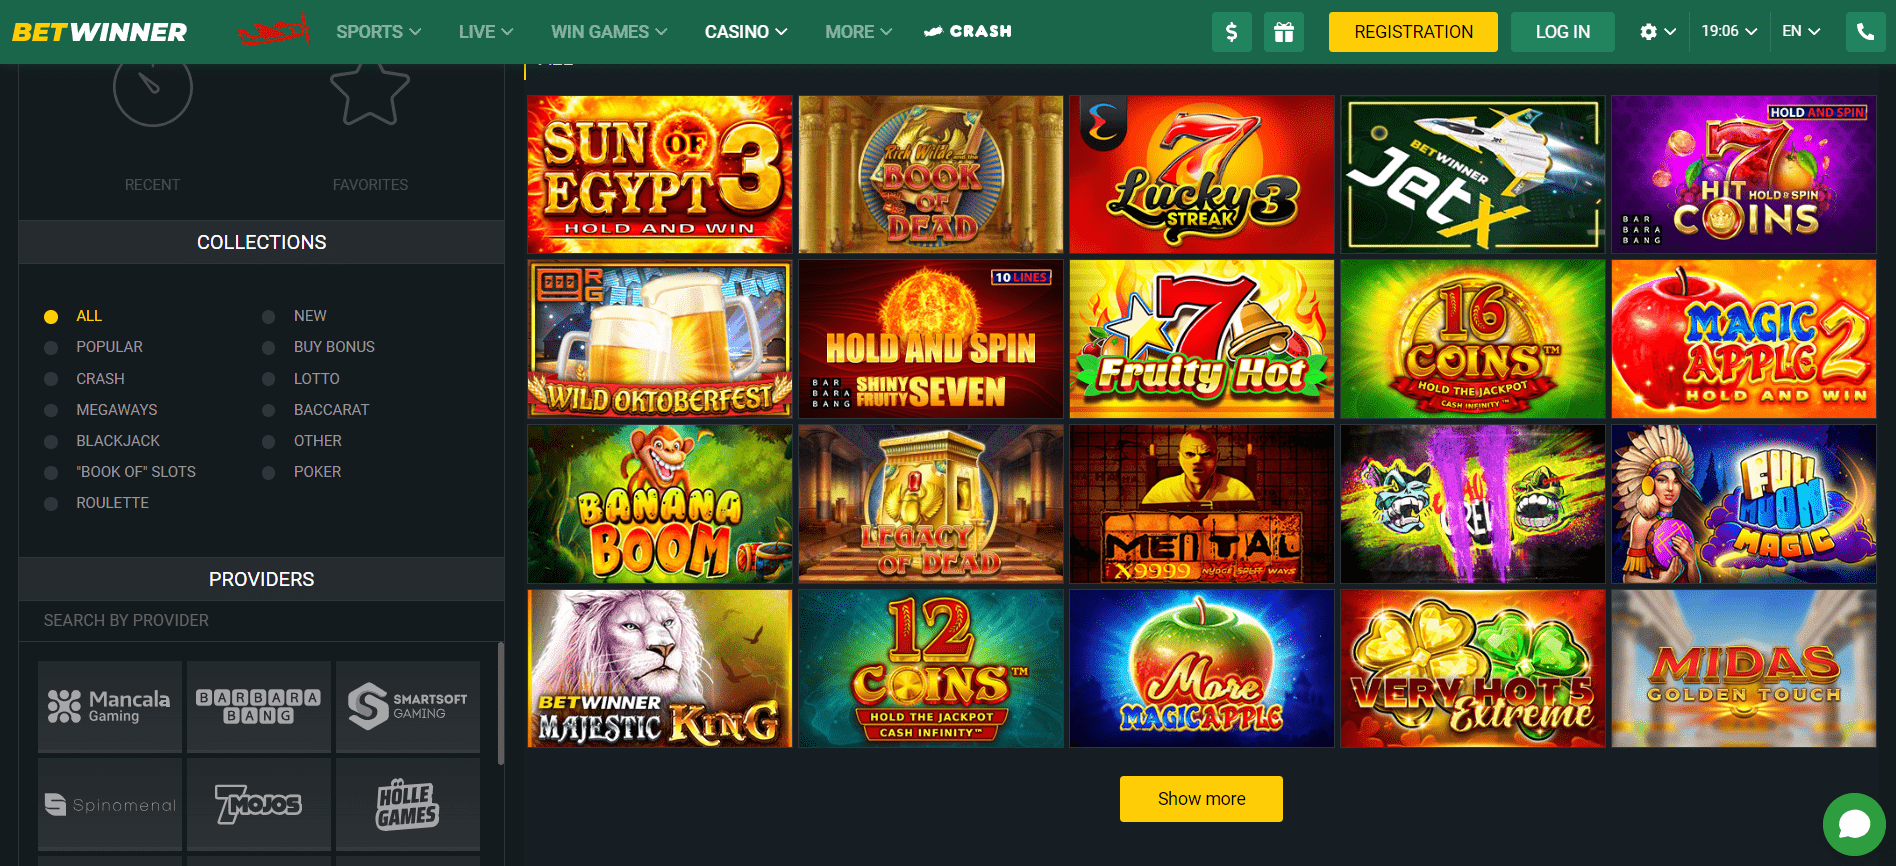 Image for Betwinner casino games